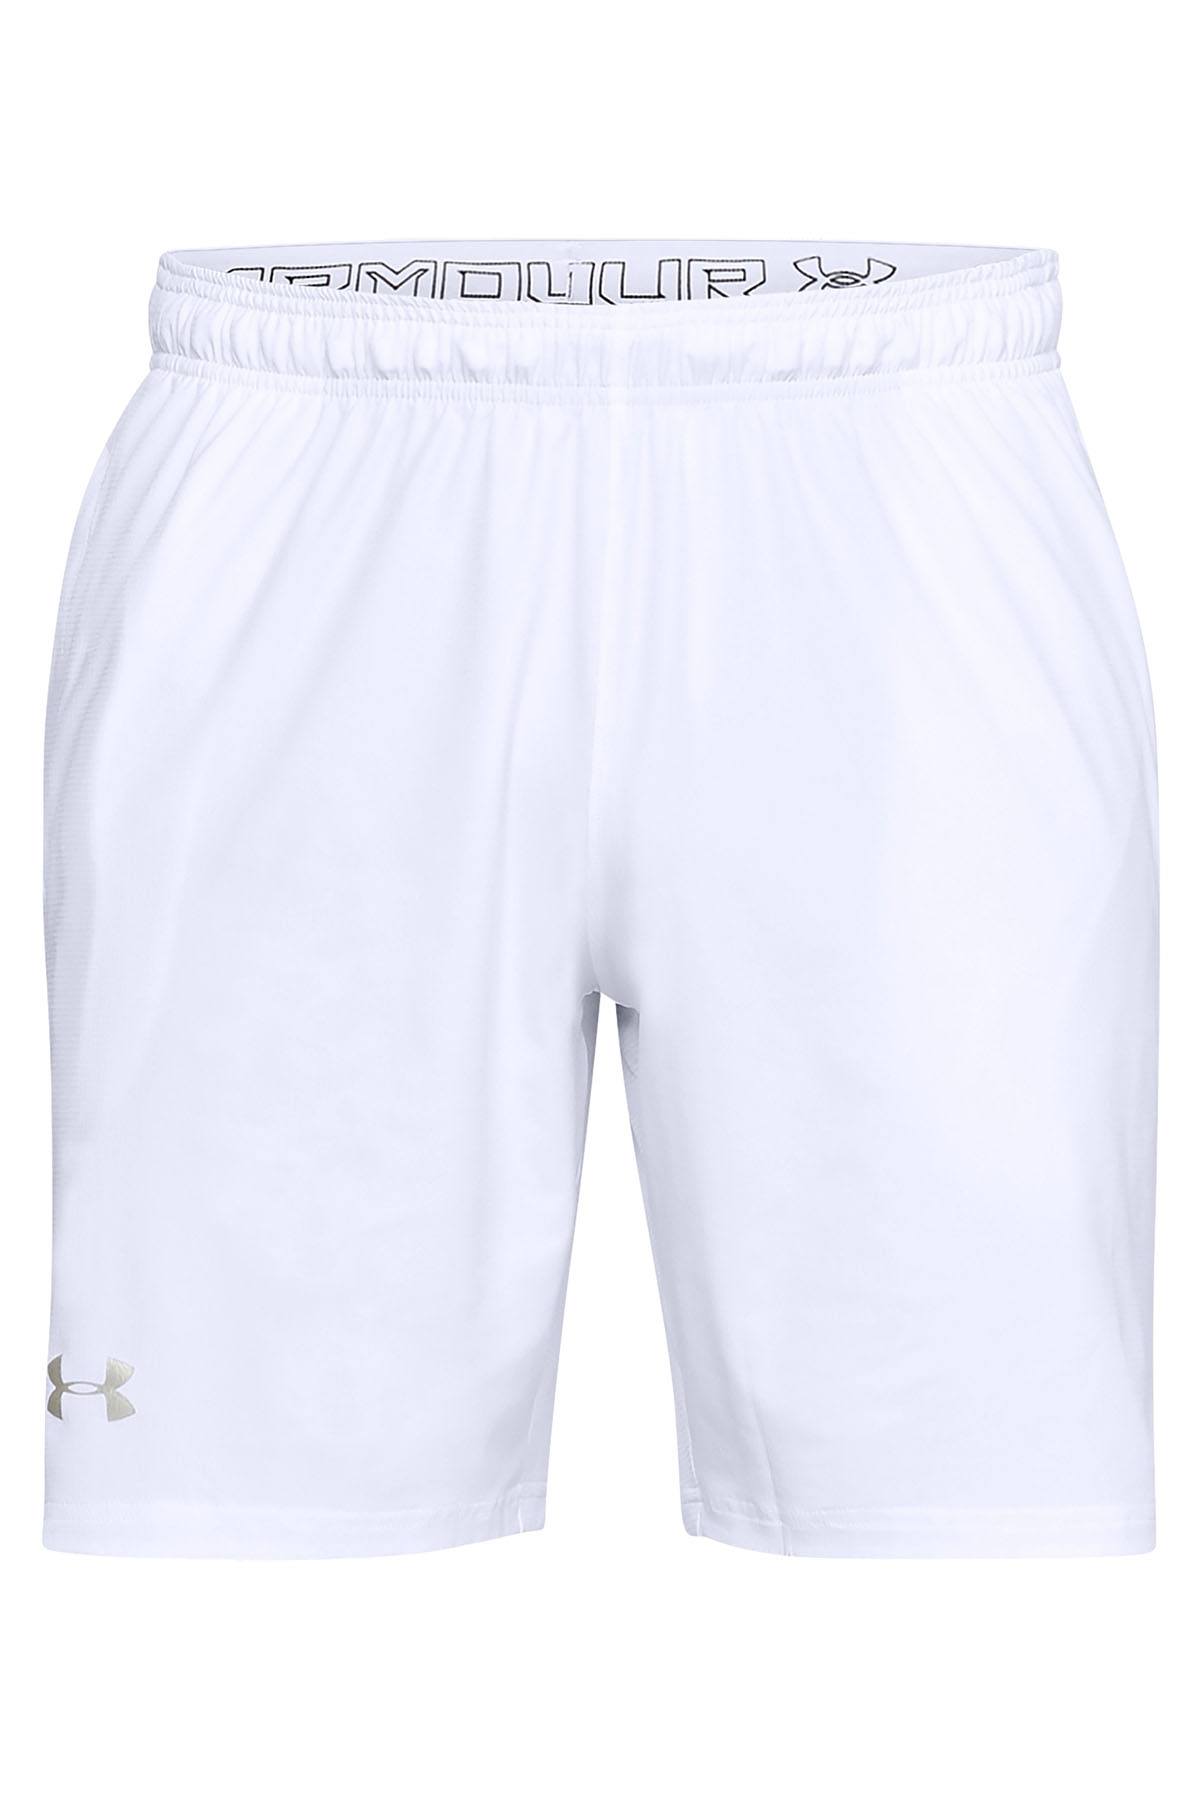 Under Armour White Cage 8" Training Short